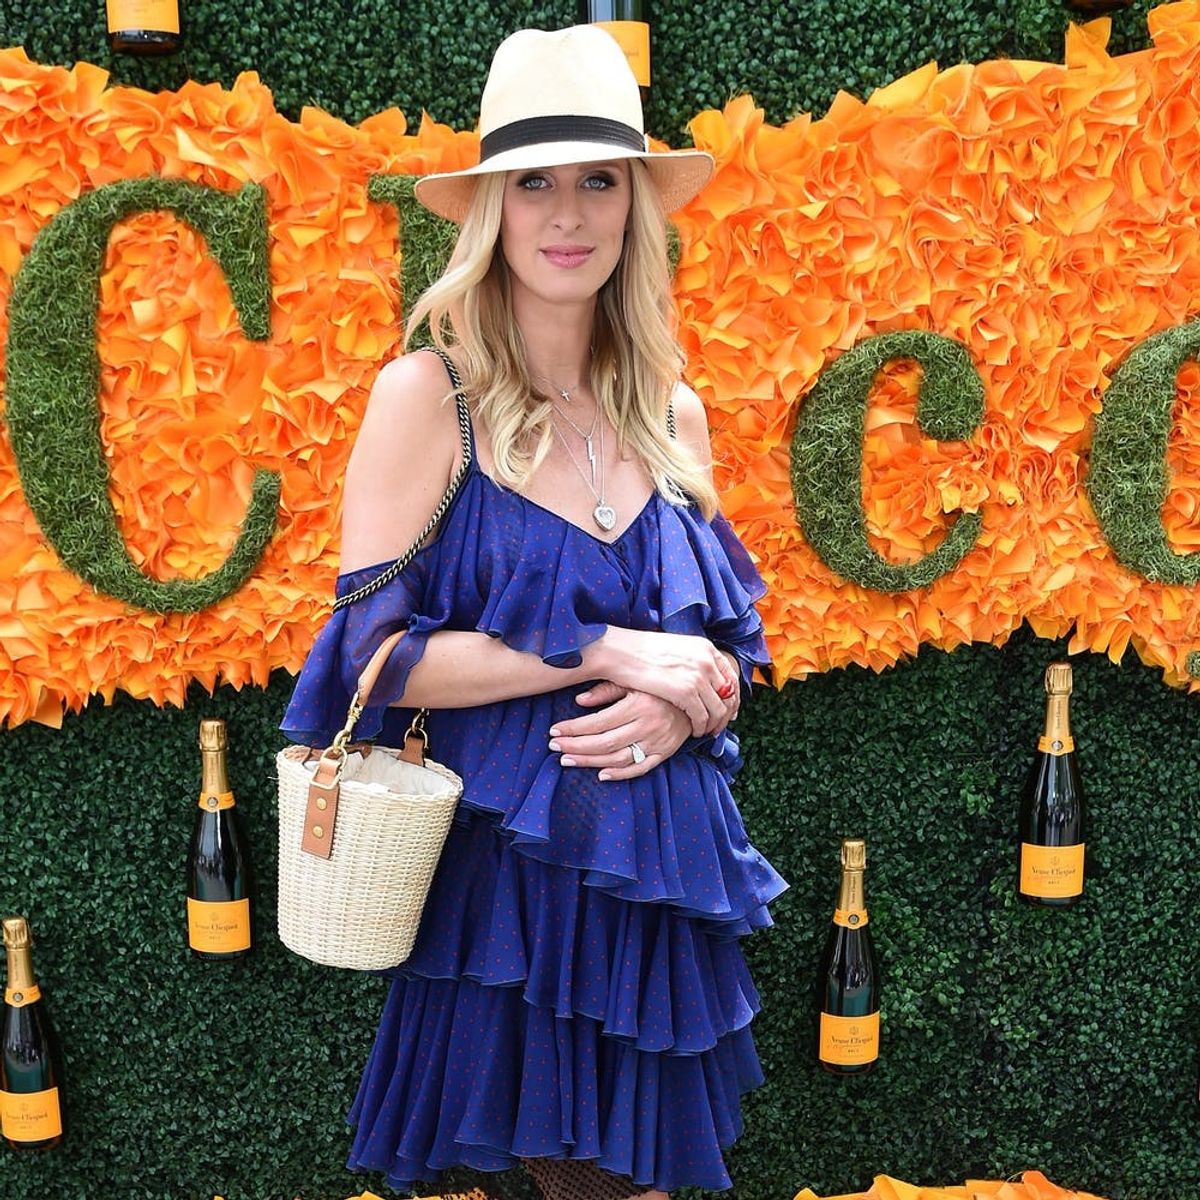 12 Celeb-Inspired Ways to Dress Your Baby Bump This Summer